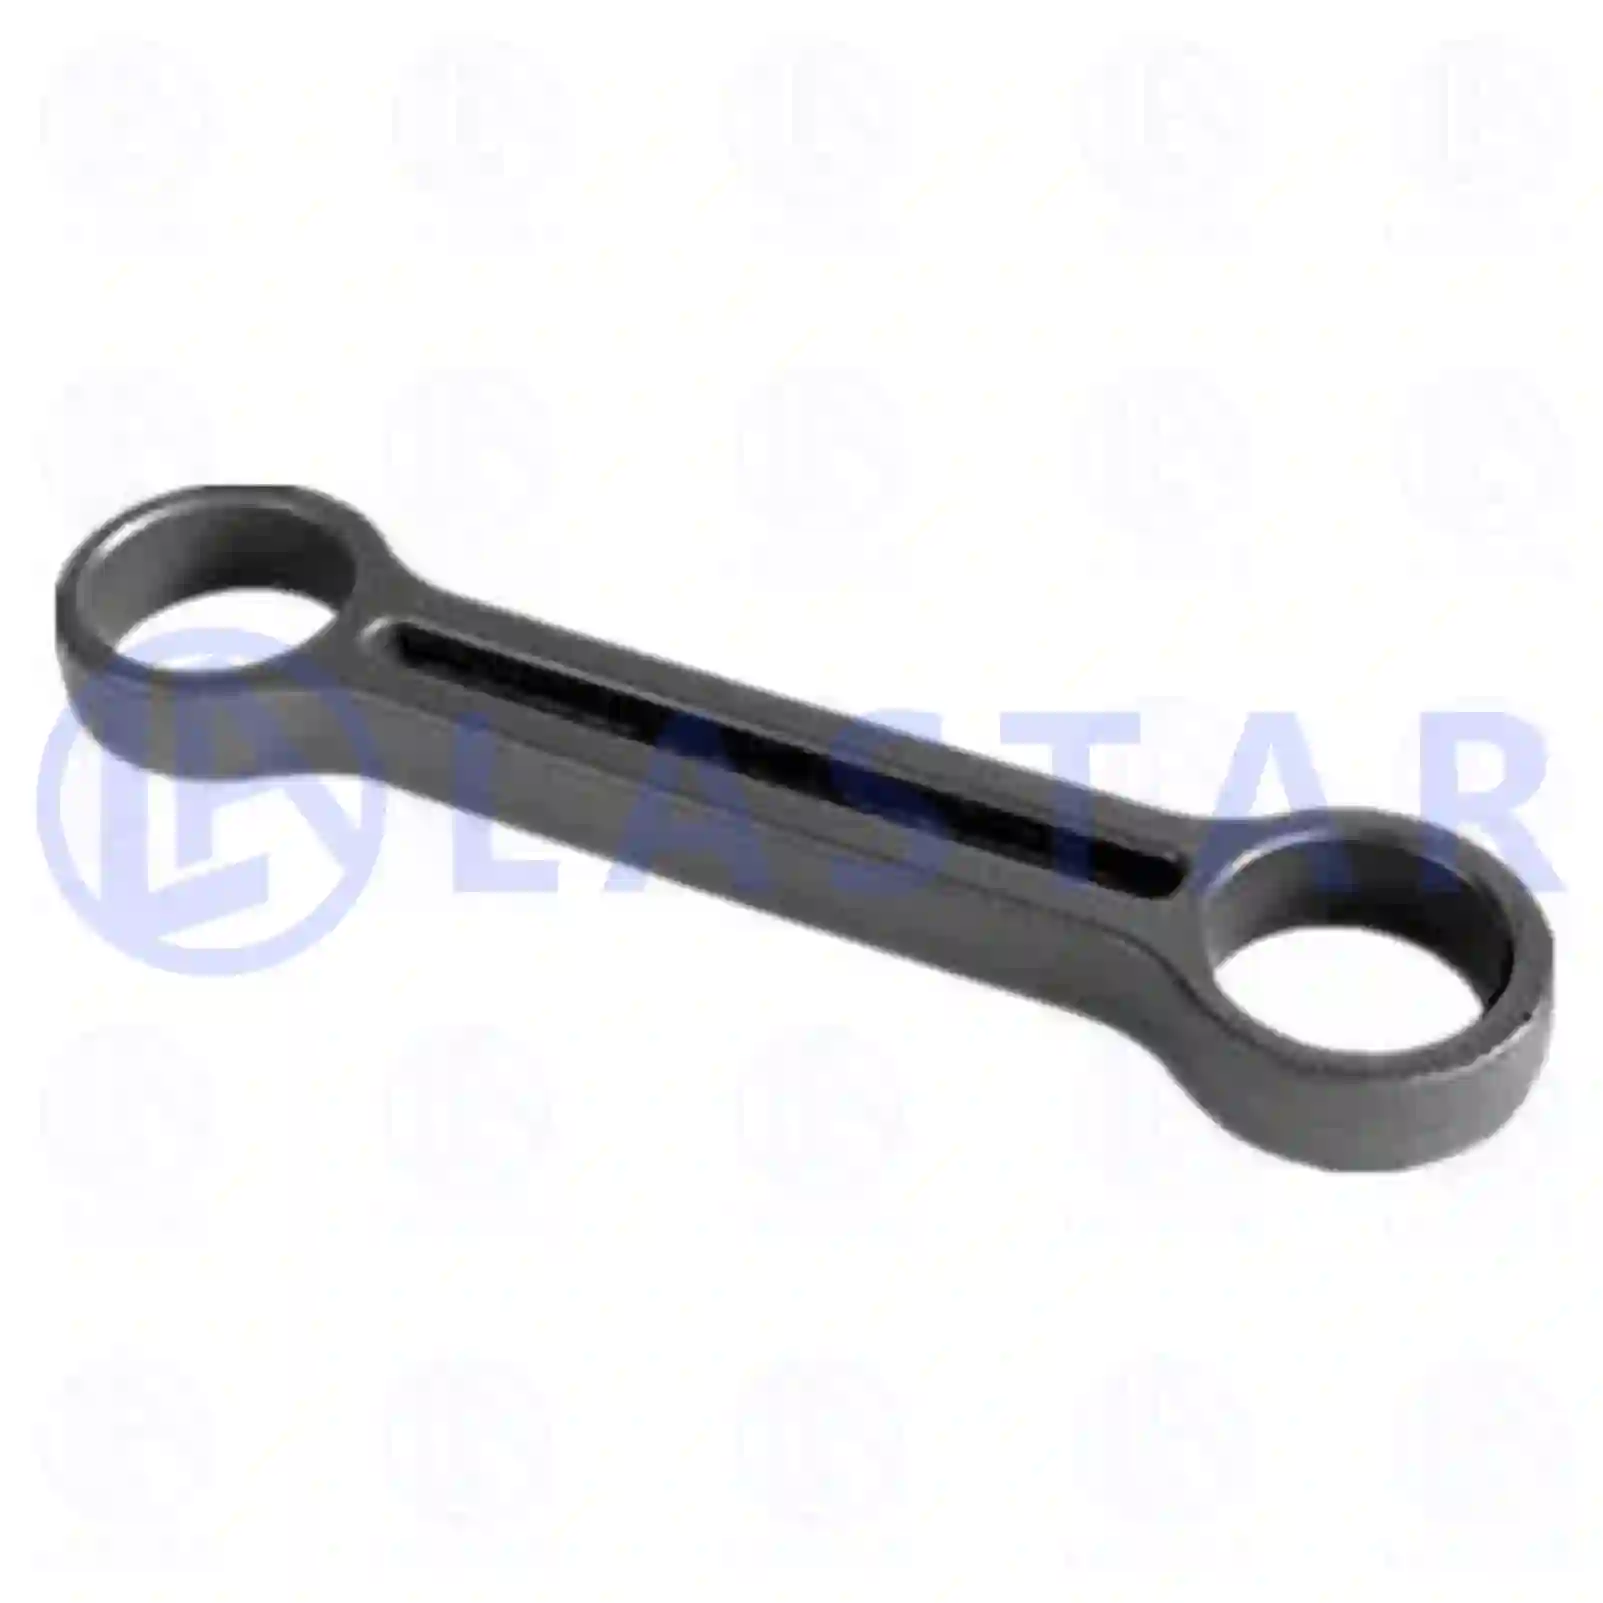 Connecting rod, stabilizer, 77728004, 9483260547, 94832 ||  77728004 Lastar Spare Part | Truck Spare Parts, Auotomotive Spare Parts Connecting rod, stabilizer, 77728004, 9483260547, 94832 ||  77728004 Lastar Spare Part | Truck Spare Parts, Auotomotive Spare Parts